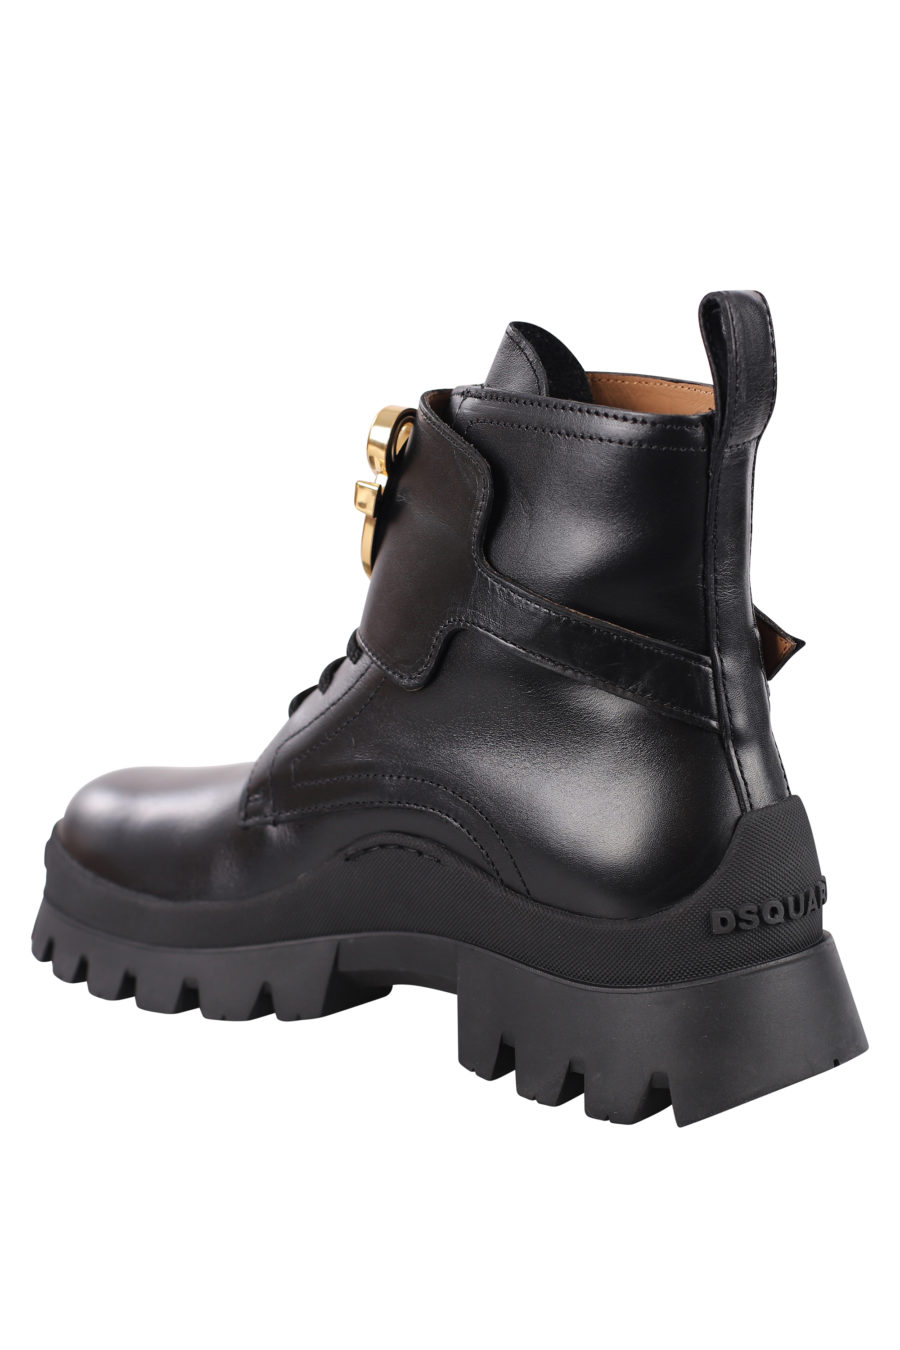 Black ankle boots with logo D2 - IMG 0699